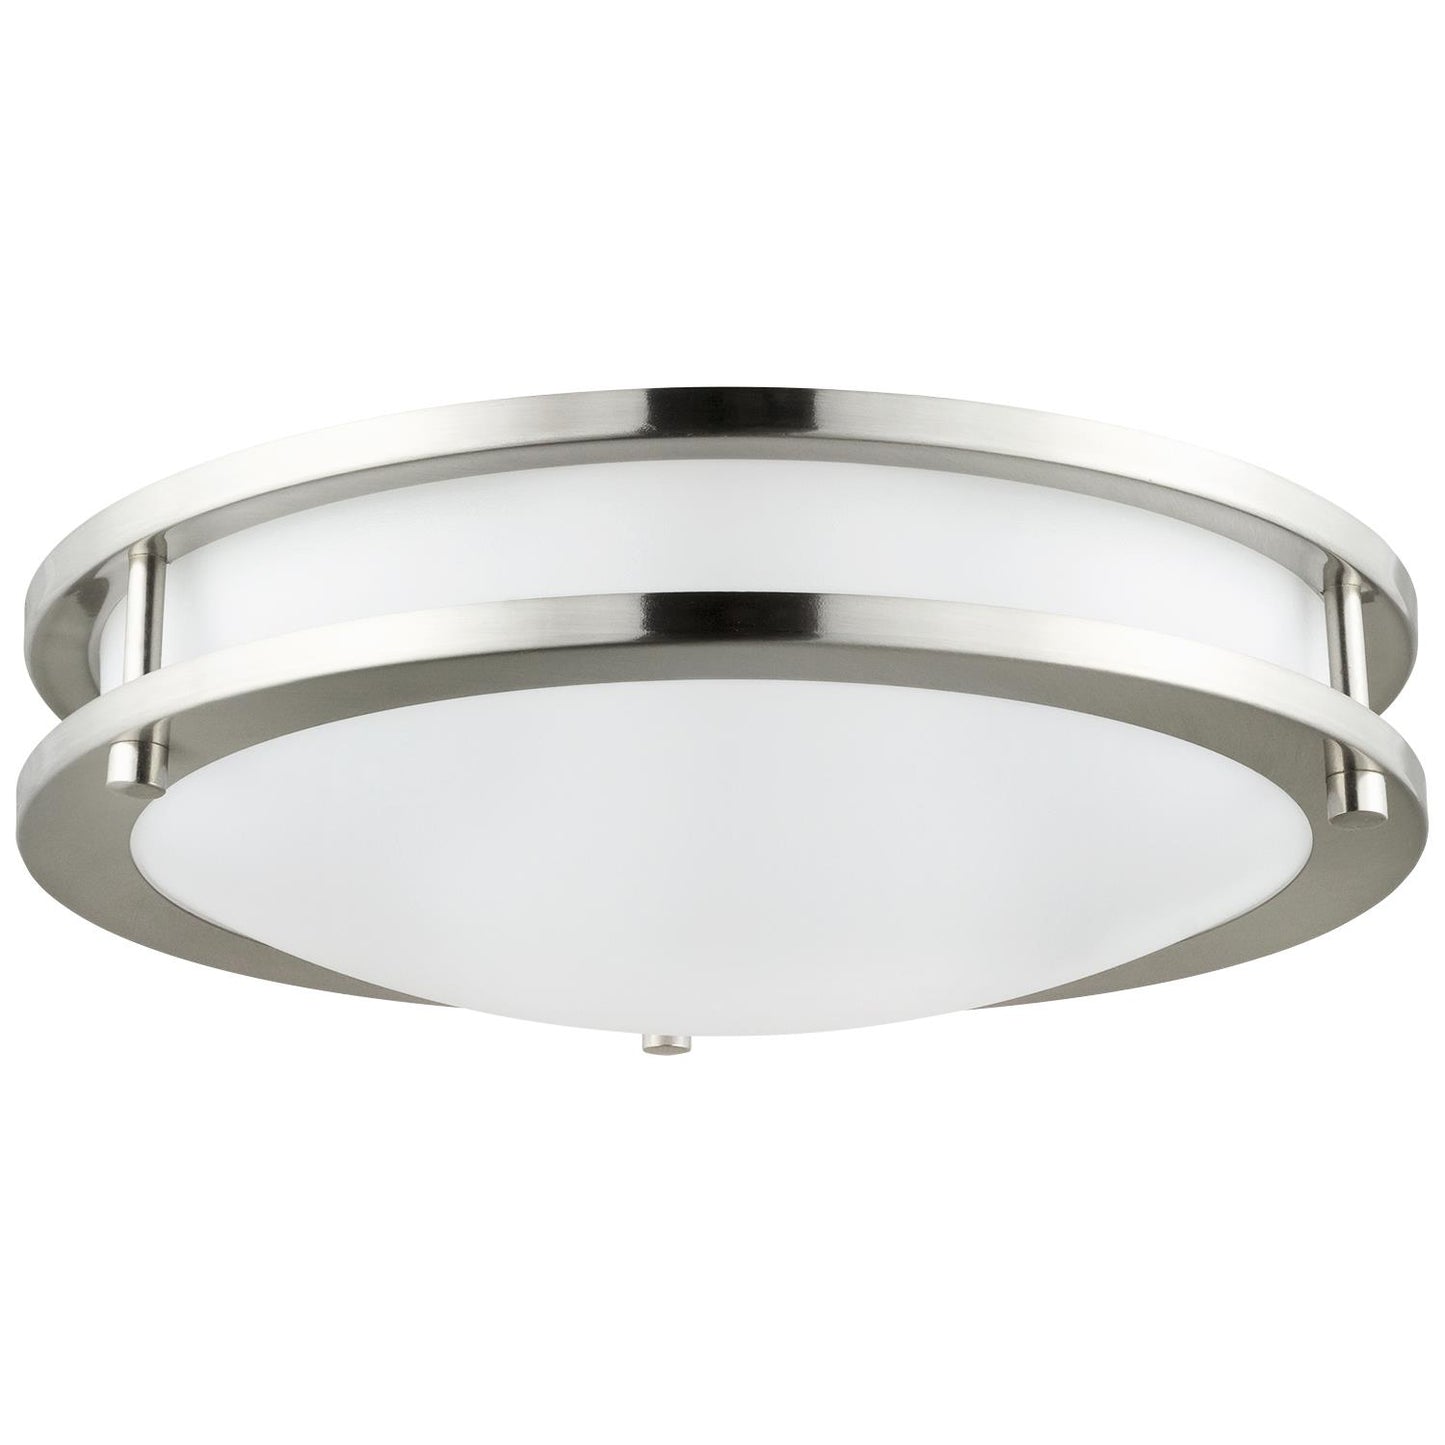 Sunlite 88357-SU LED Double Band Round Ceiling Fixture, 10-Inch, 15 Watt, 950 Lumens, Dimmable, Brushed Nickel Finish, ETL Listed, Energy Star, 40K - Cool White